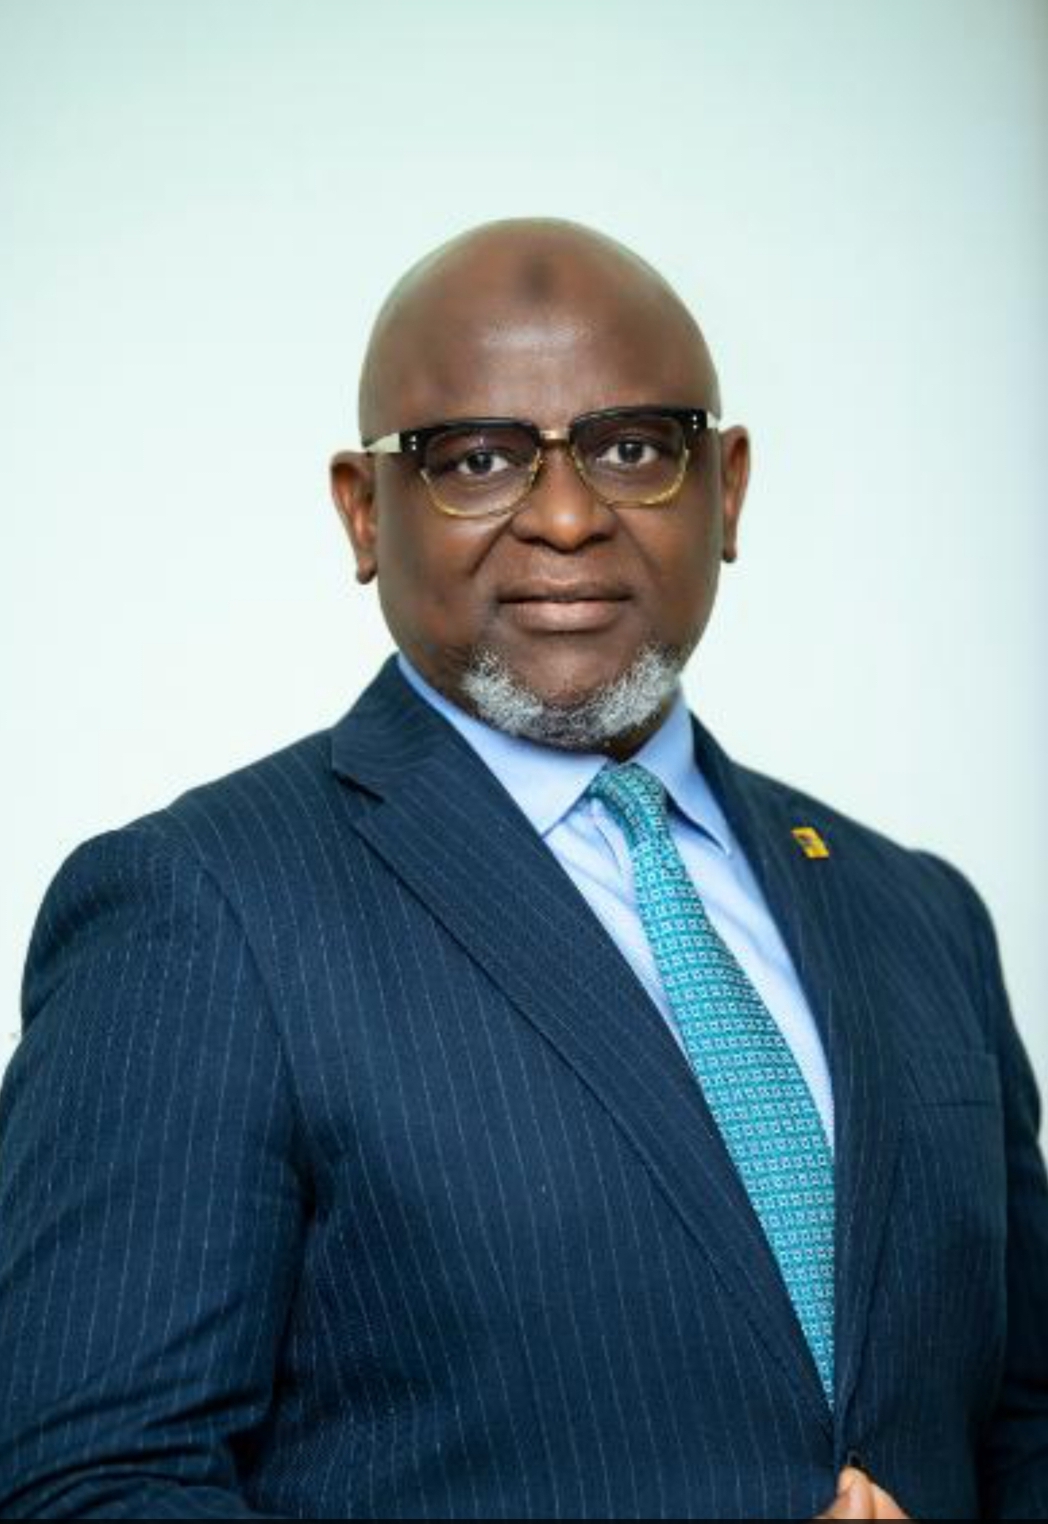 ADEDUNTAN: BANKS, CUSTOMERS MUST APPROACH 2023 WITH PARTNERSHIP MINDSET